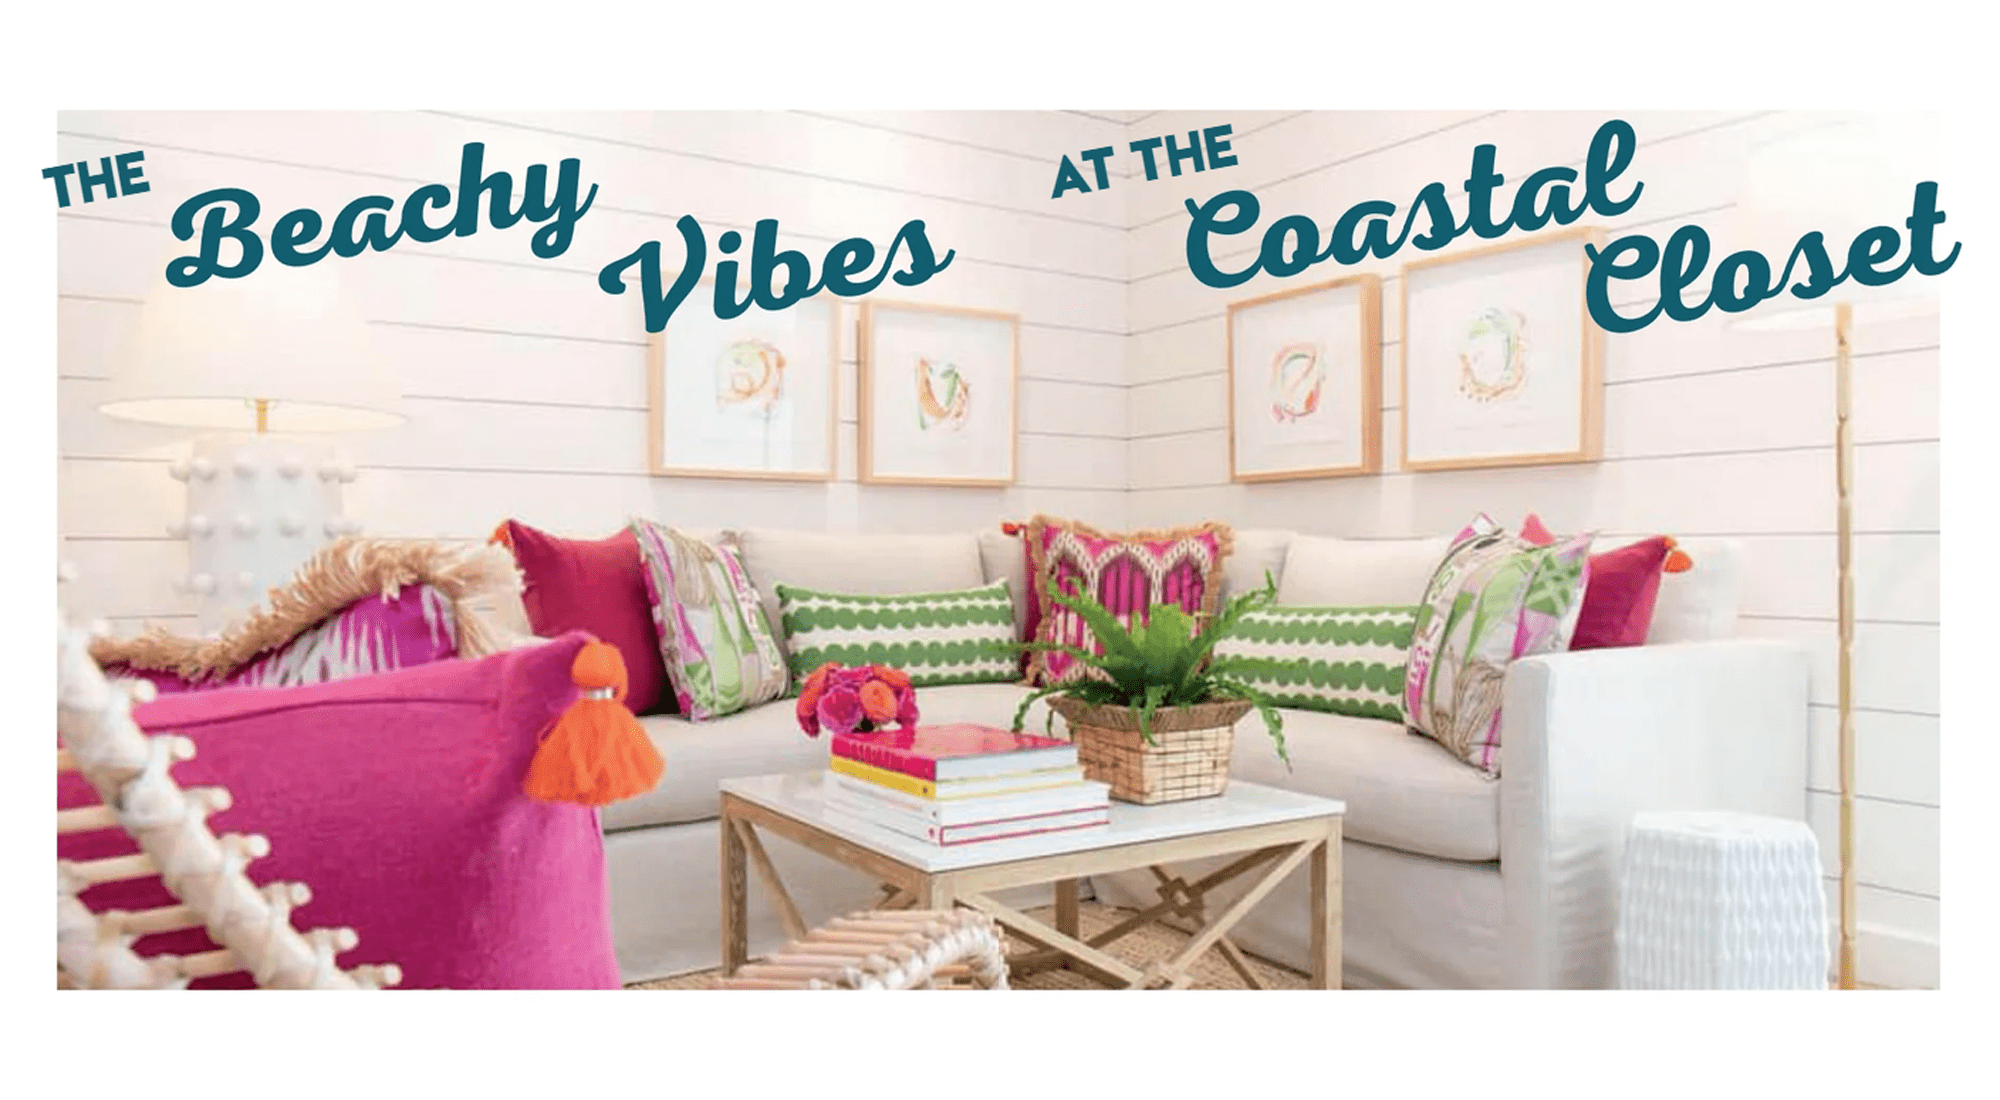 The Beachy Vibes At The Coastal Closet featured image interior of beach home with beautiful decor